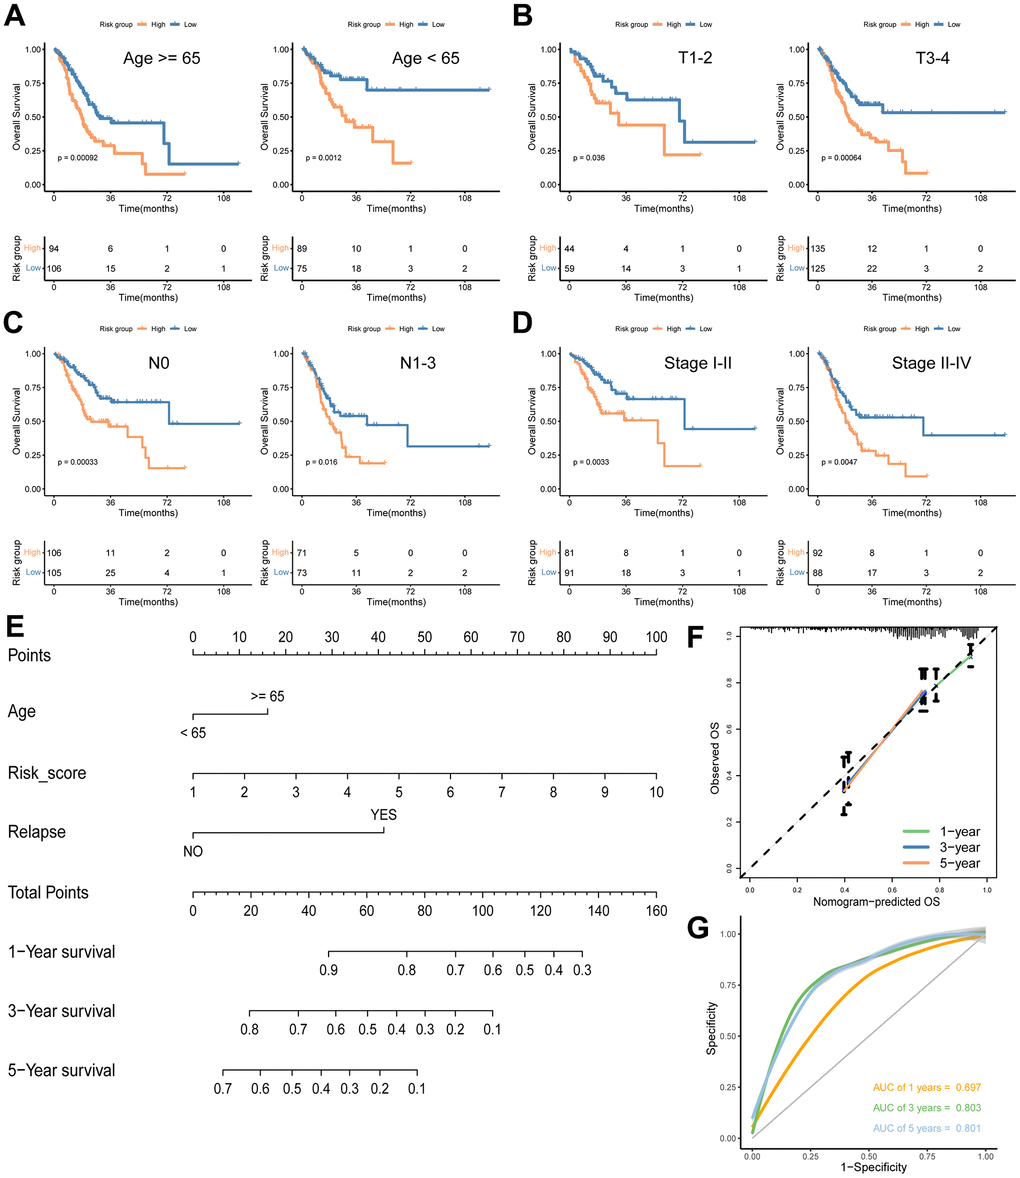 Analyses of associations between the signature risk score and other clinical parameters. Survival analyses according to age (A), T stage (B), N stage (C) and stage (D). (E) A nomogram including age, risk score and relapse for predicting 1-, 3-, and 5- year survival in GC. Calibration curves (F) and ROC curves (G) at 1-, 3-, and 5-year are used for determining the efficacy and reliability of the monogram.